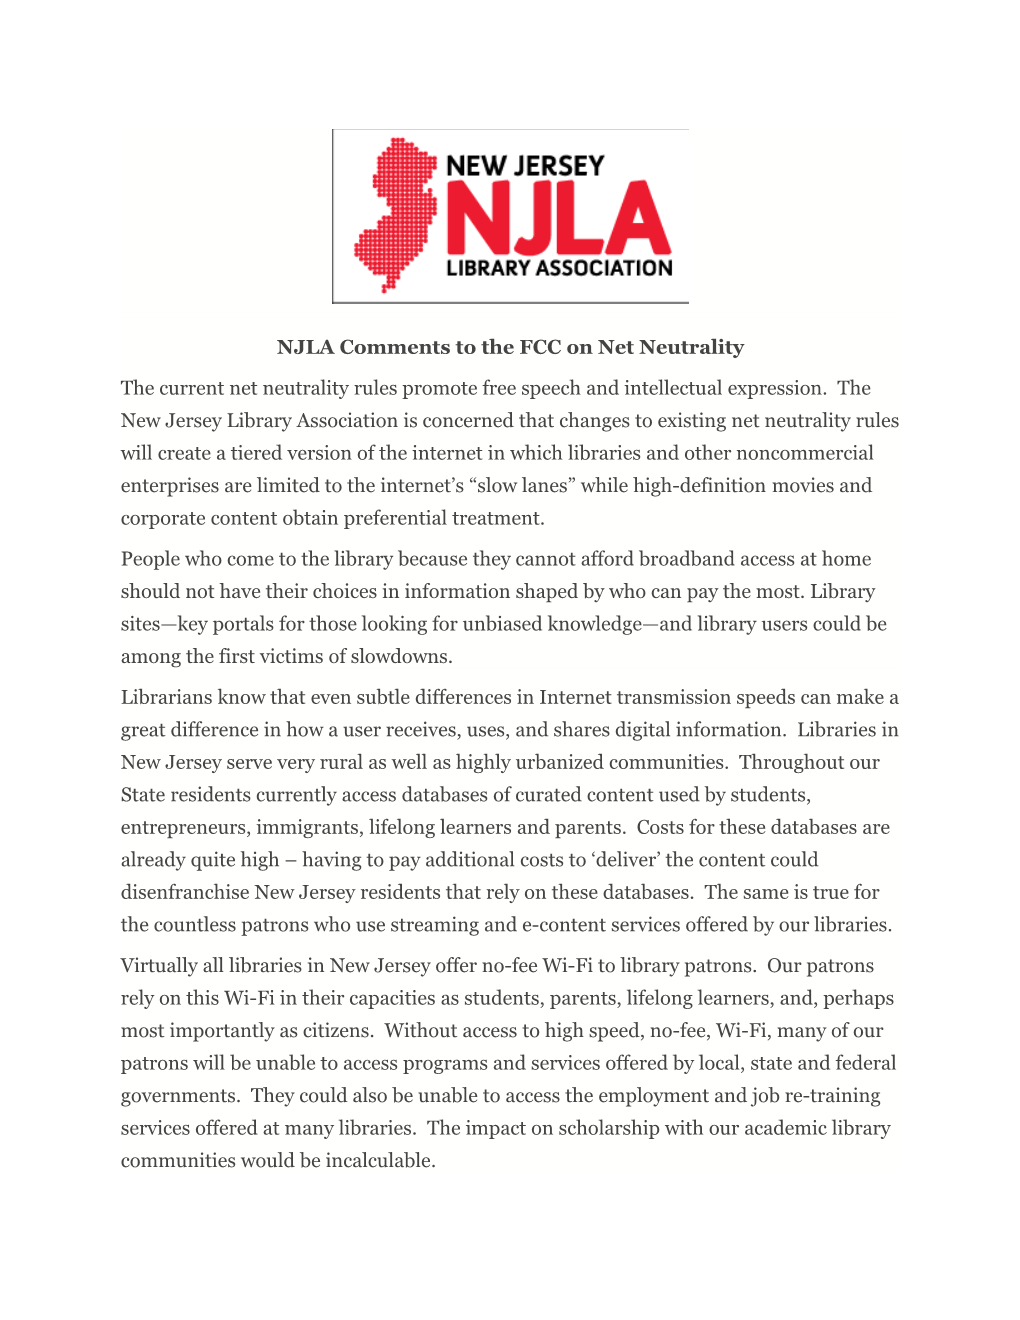 NJLA Comments to the FCC on Net Neutrality